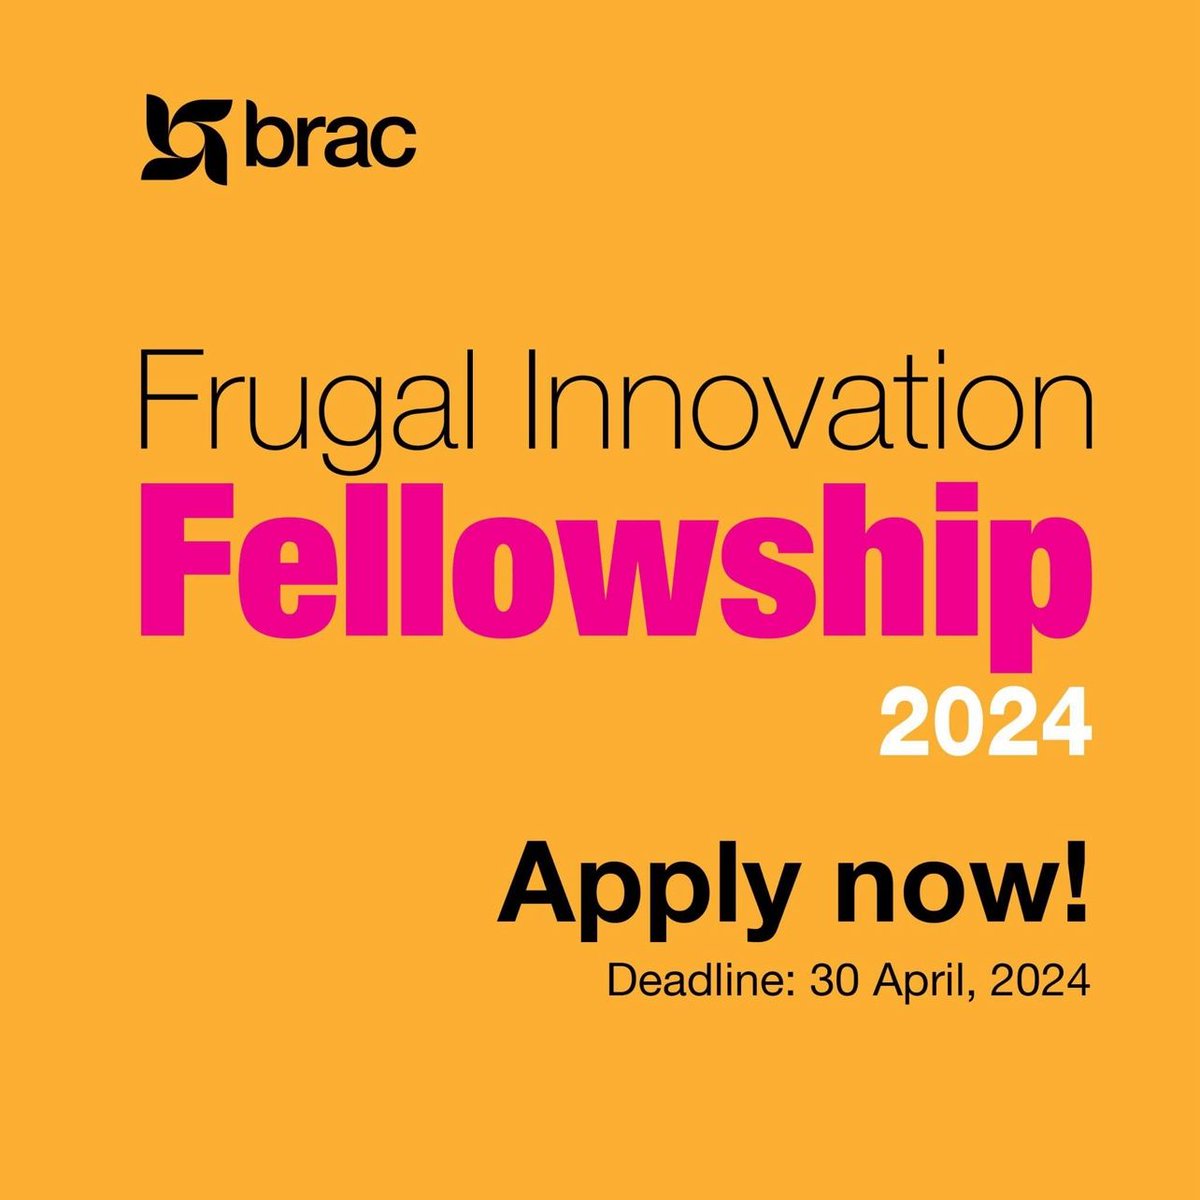 Are you a social entrepreneur working in climate adaptation - test your idea & scale up ⬆️BRAC has launched the Frugal Innovation Fellowship 2024

Apply ▶️ lnkd.in/ee3WnzTE

#ClimateFellowship
#FrugalInnovation
#SocialInnovation
#ClimateChange
#InnovationChallenge